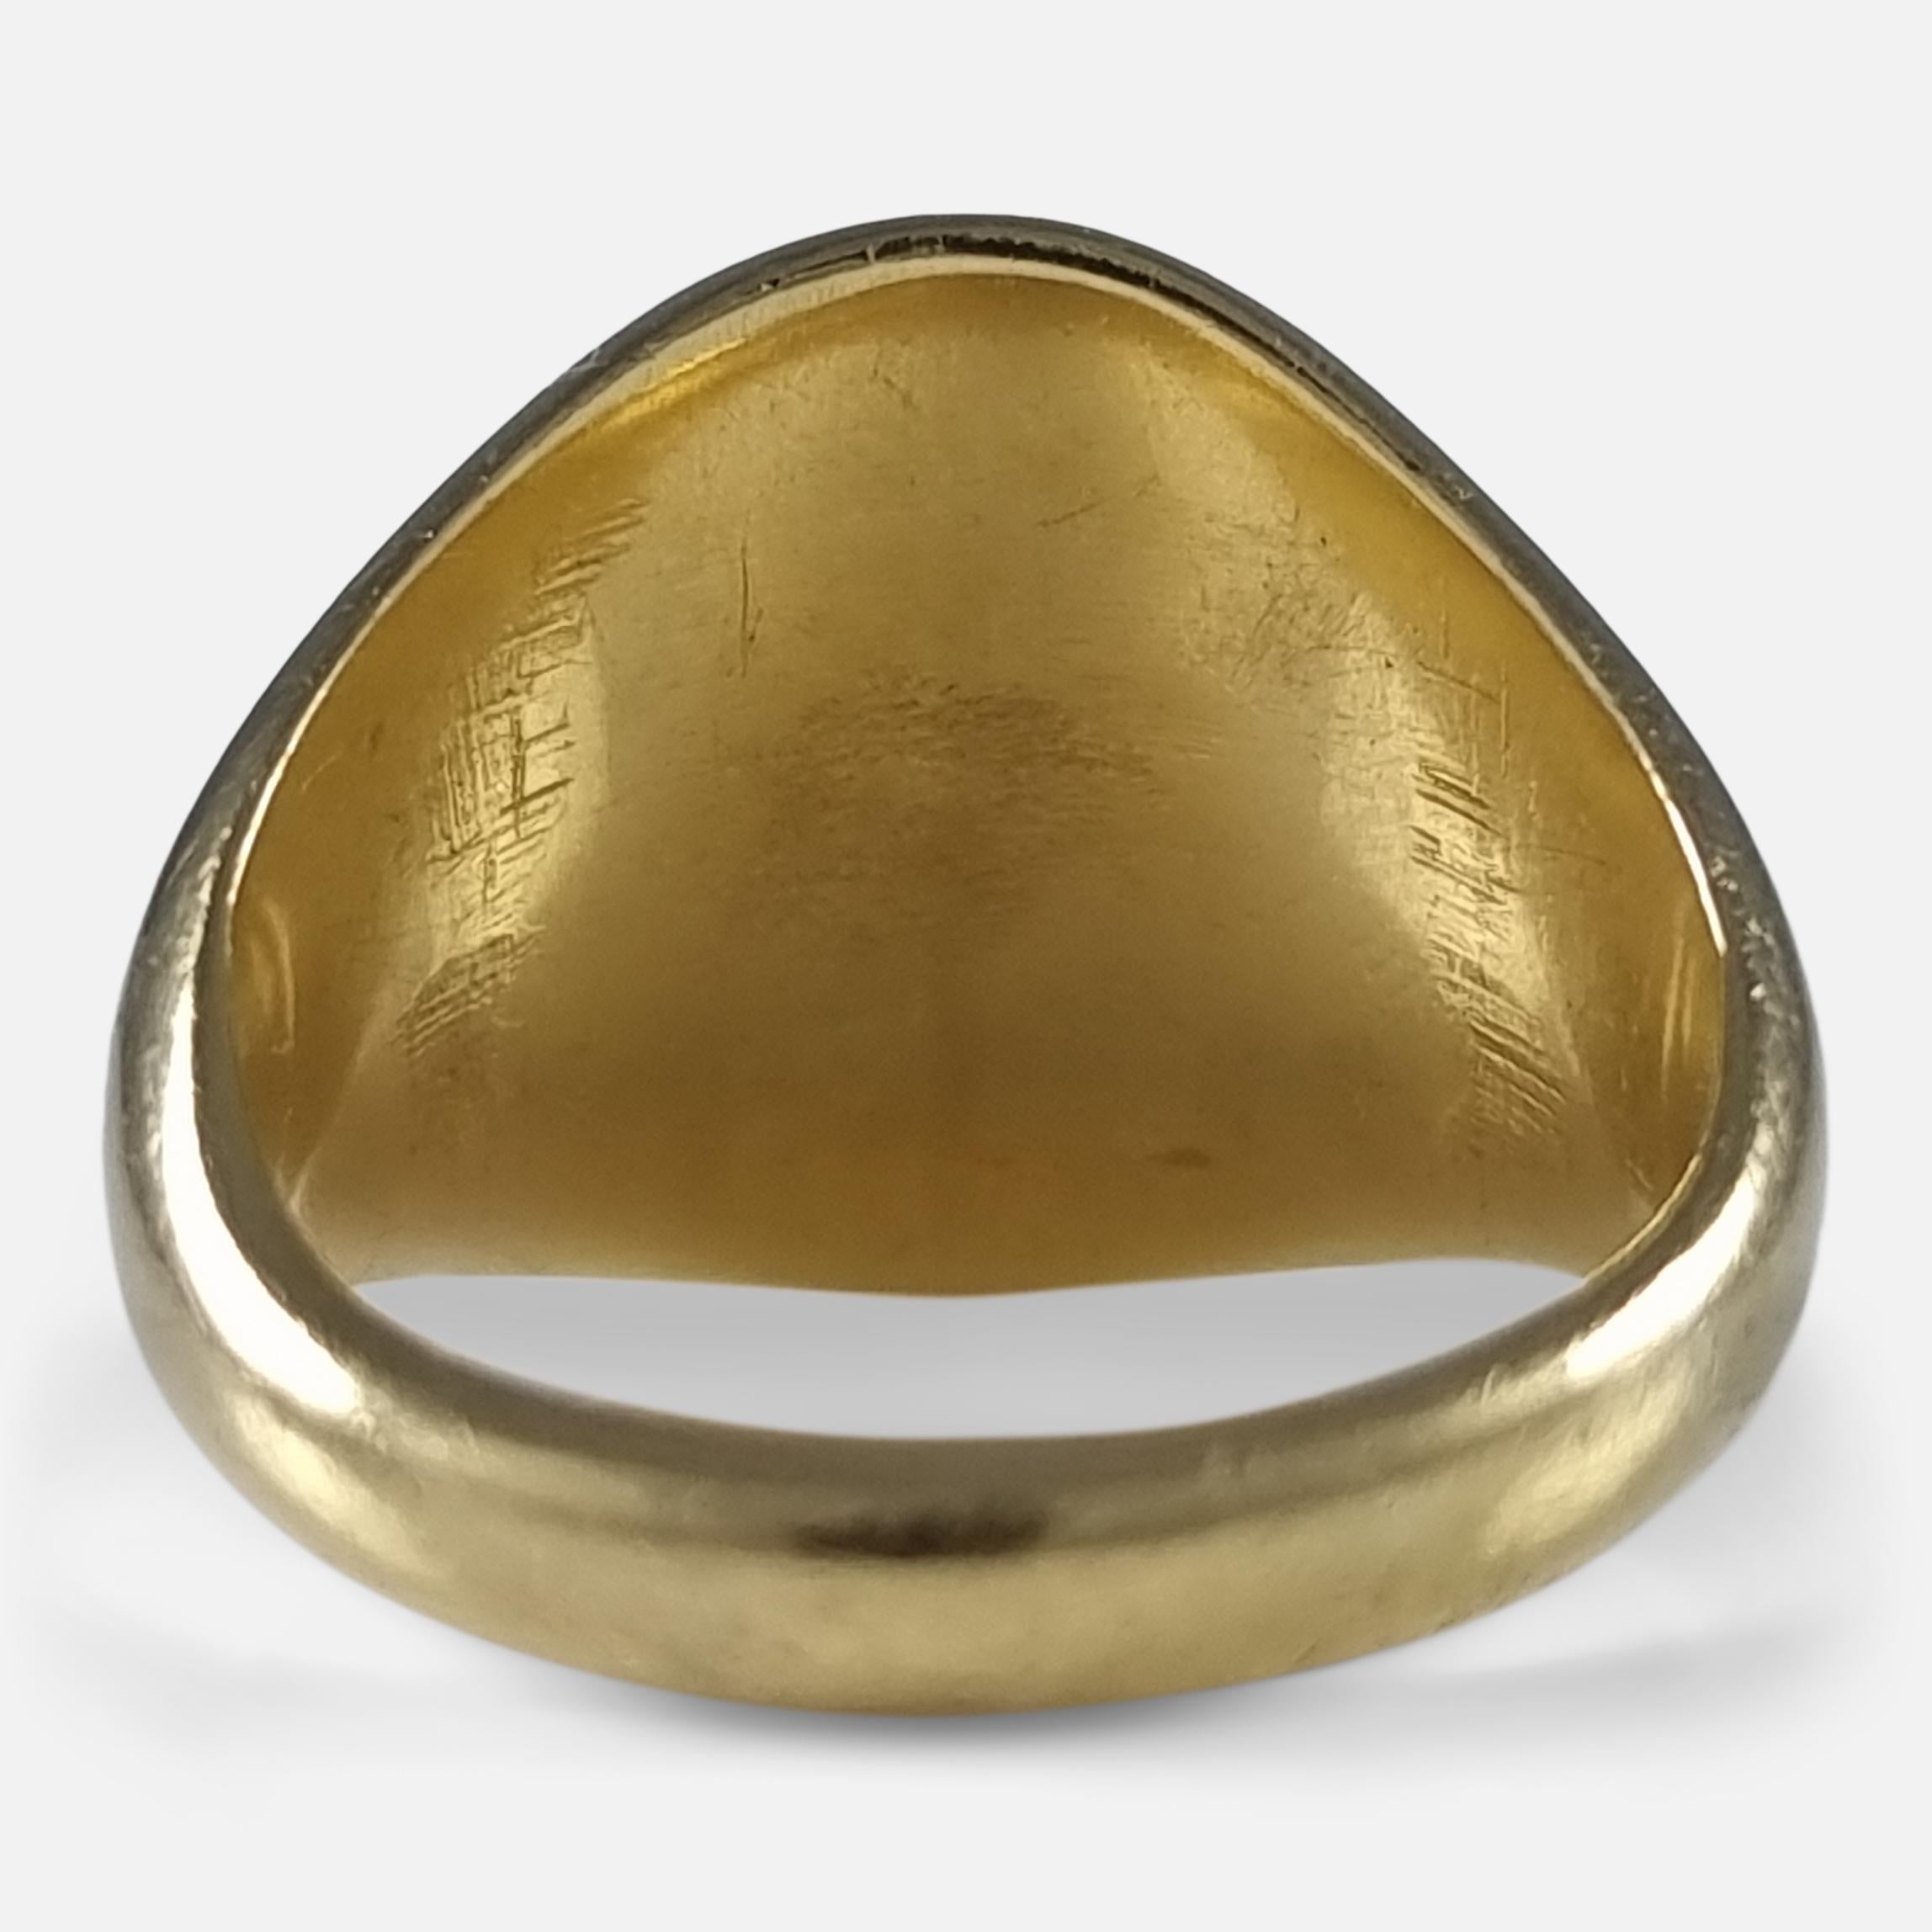 Unconquered Virtue Is Glorious - 18ct Gold Intaglio Signet Ring 1